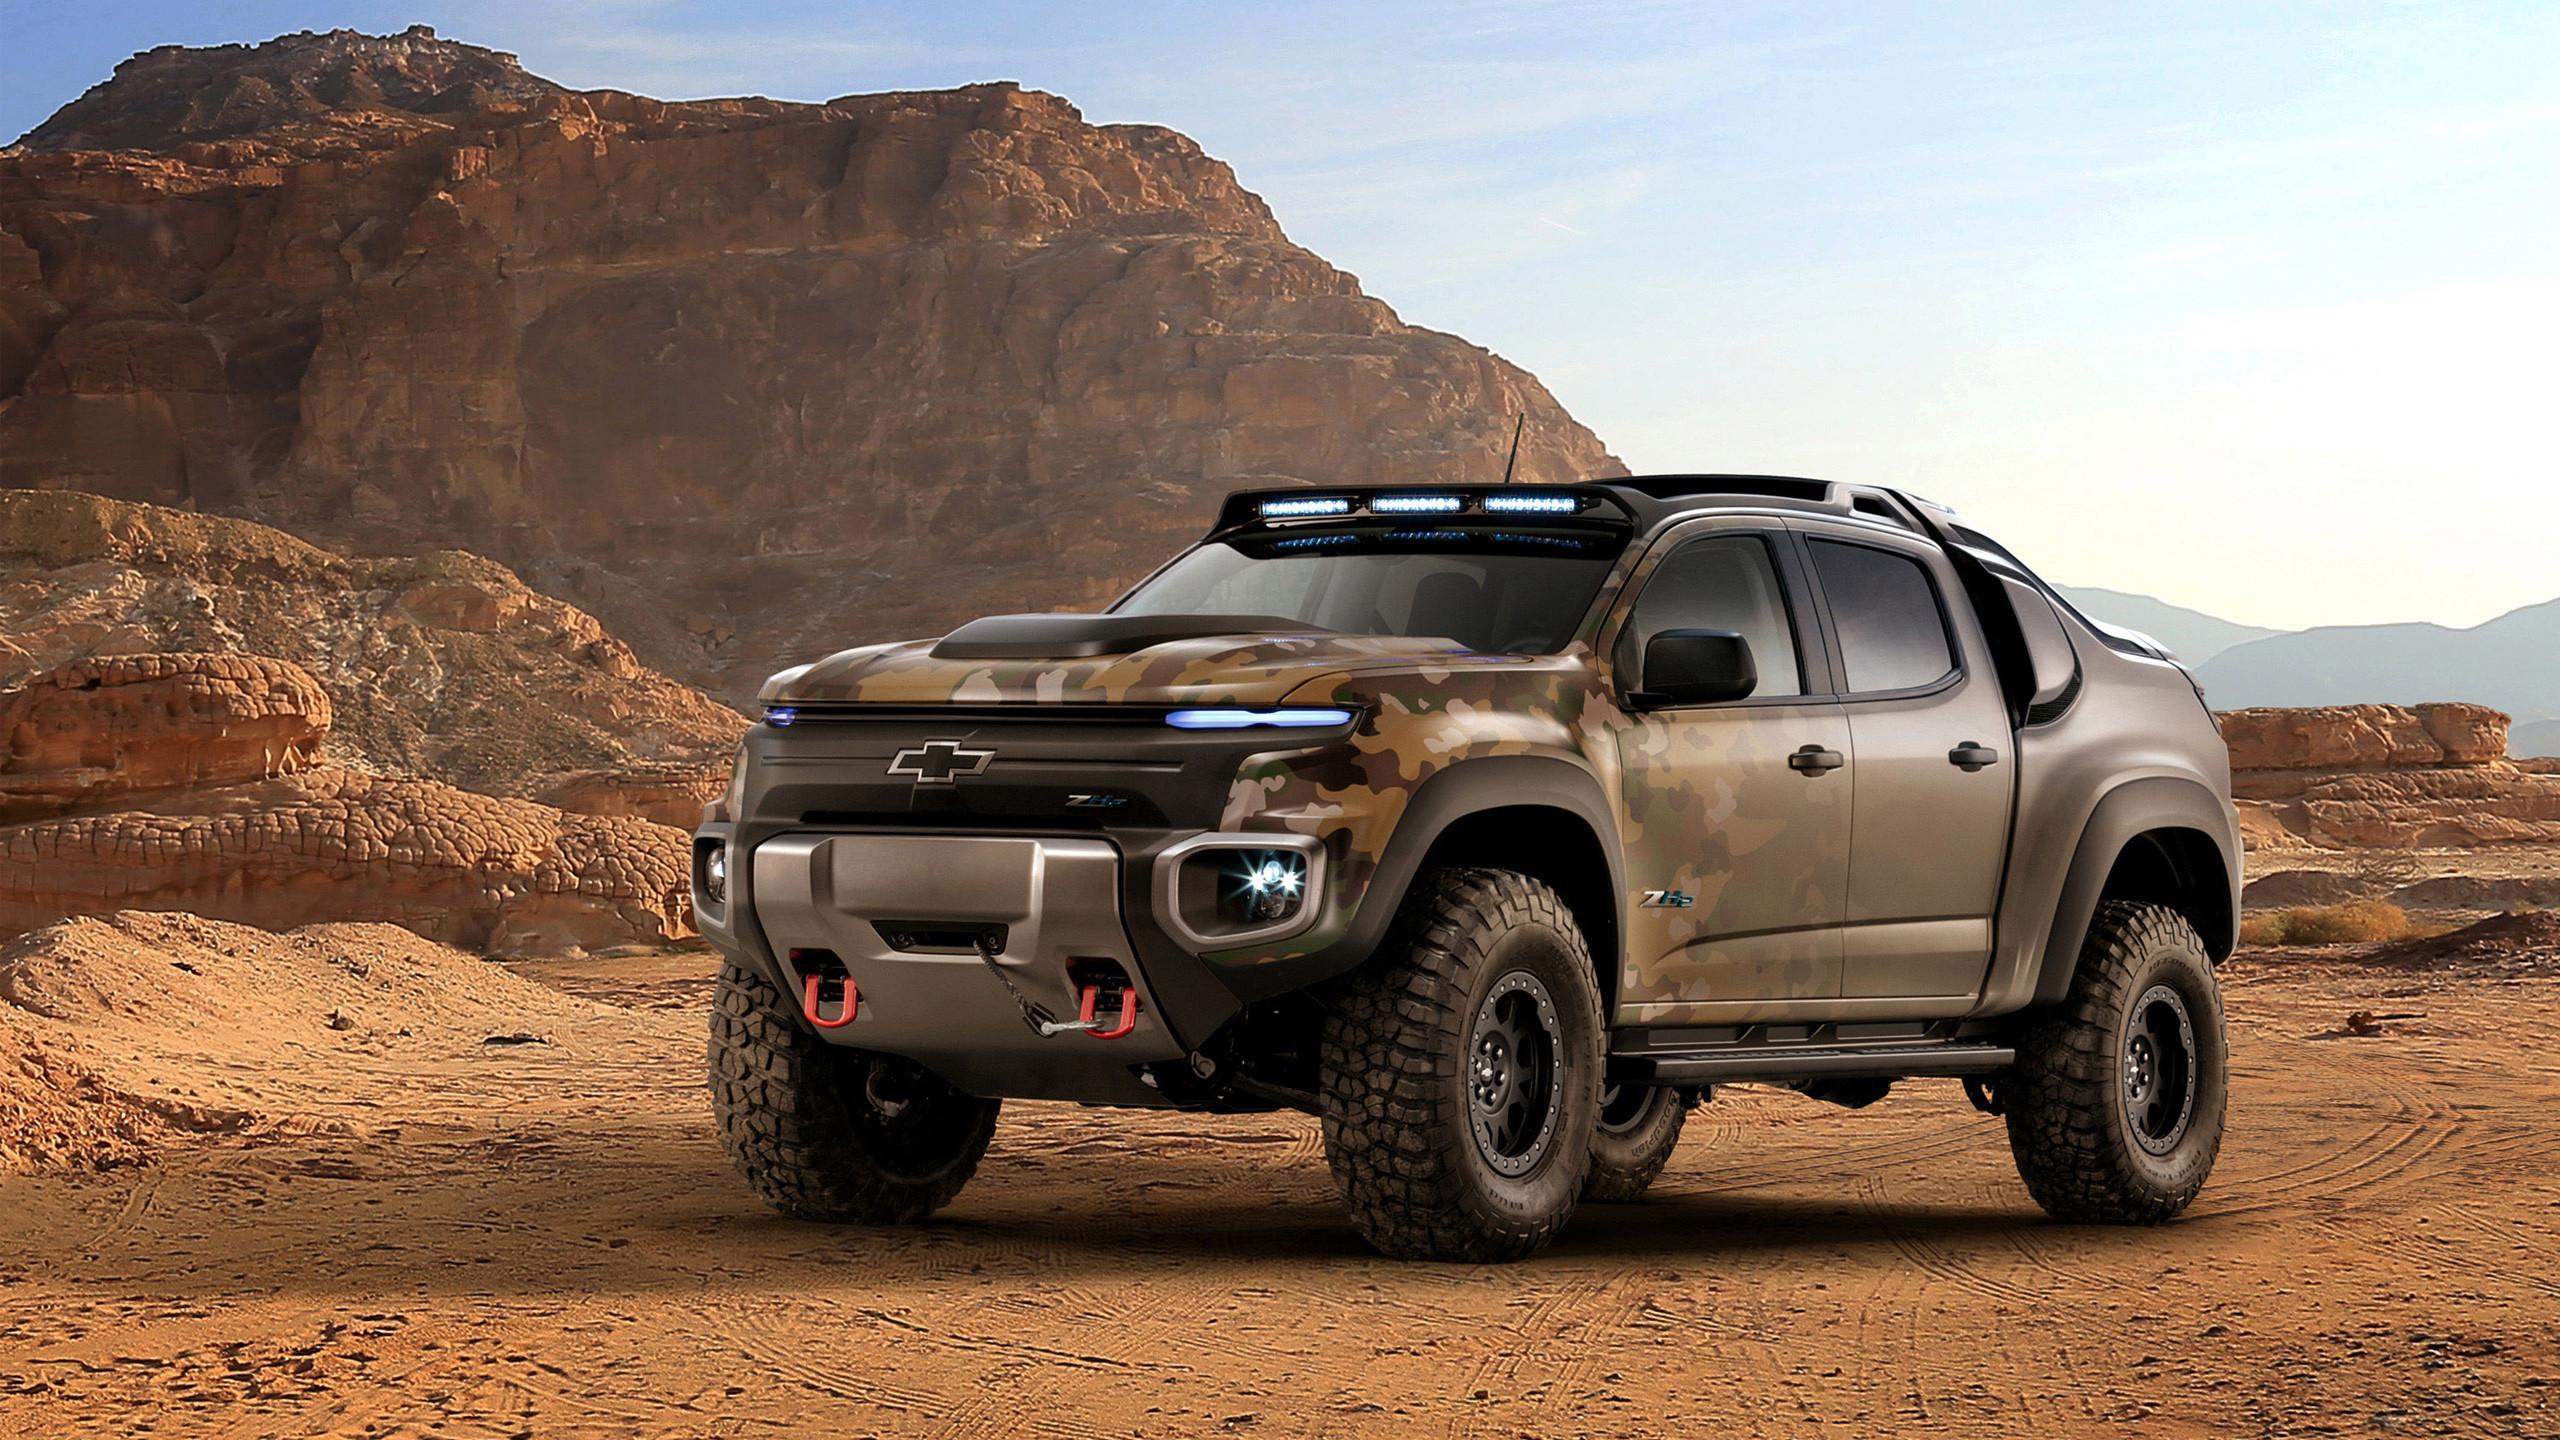 2560x1440 2016 Chevrolet Colorado ZH2 Fuel Cell Army truck